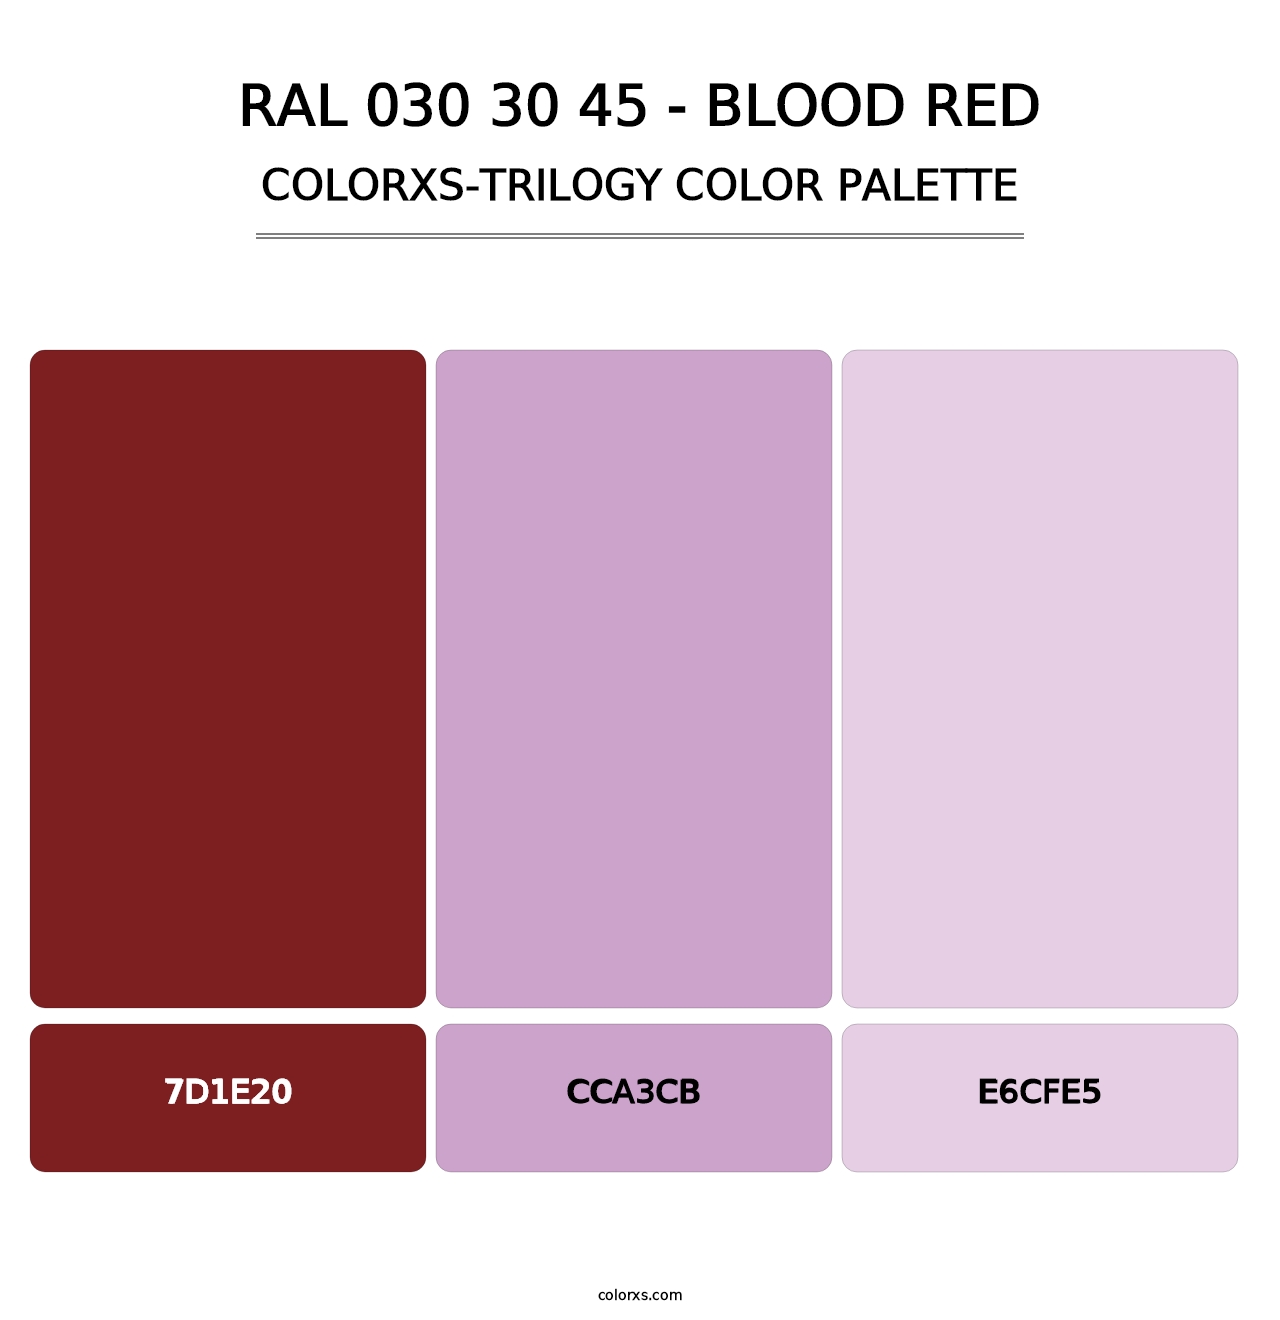 RAL 030 30 45 - Blood Red - Colorxs Trilogy Palette